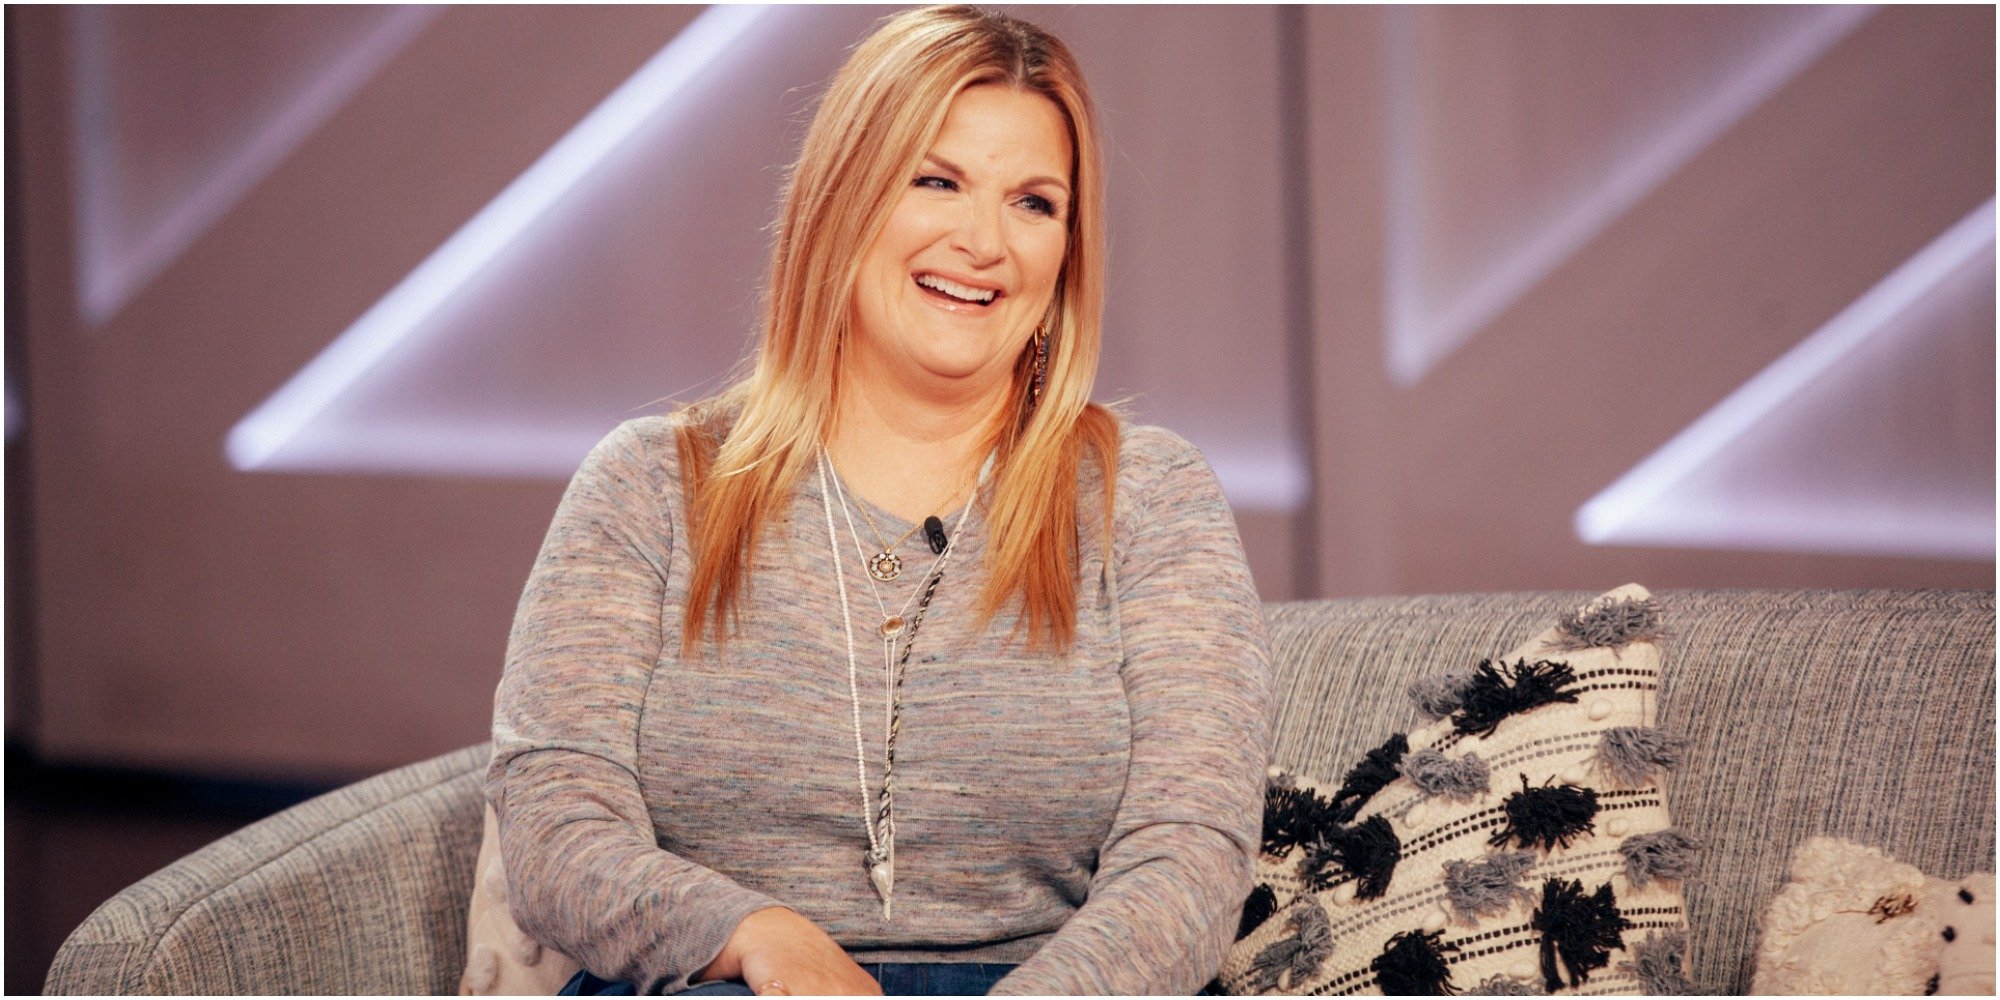 Trisha Yearwood sit on a sofa during an appearance on The Kelly Clarkson Show.